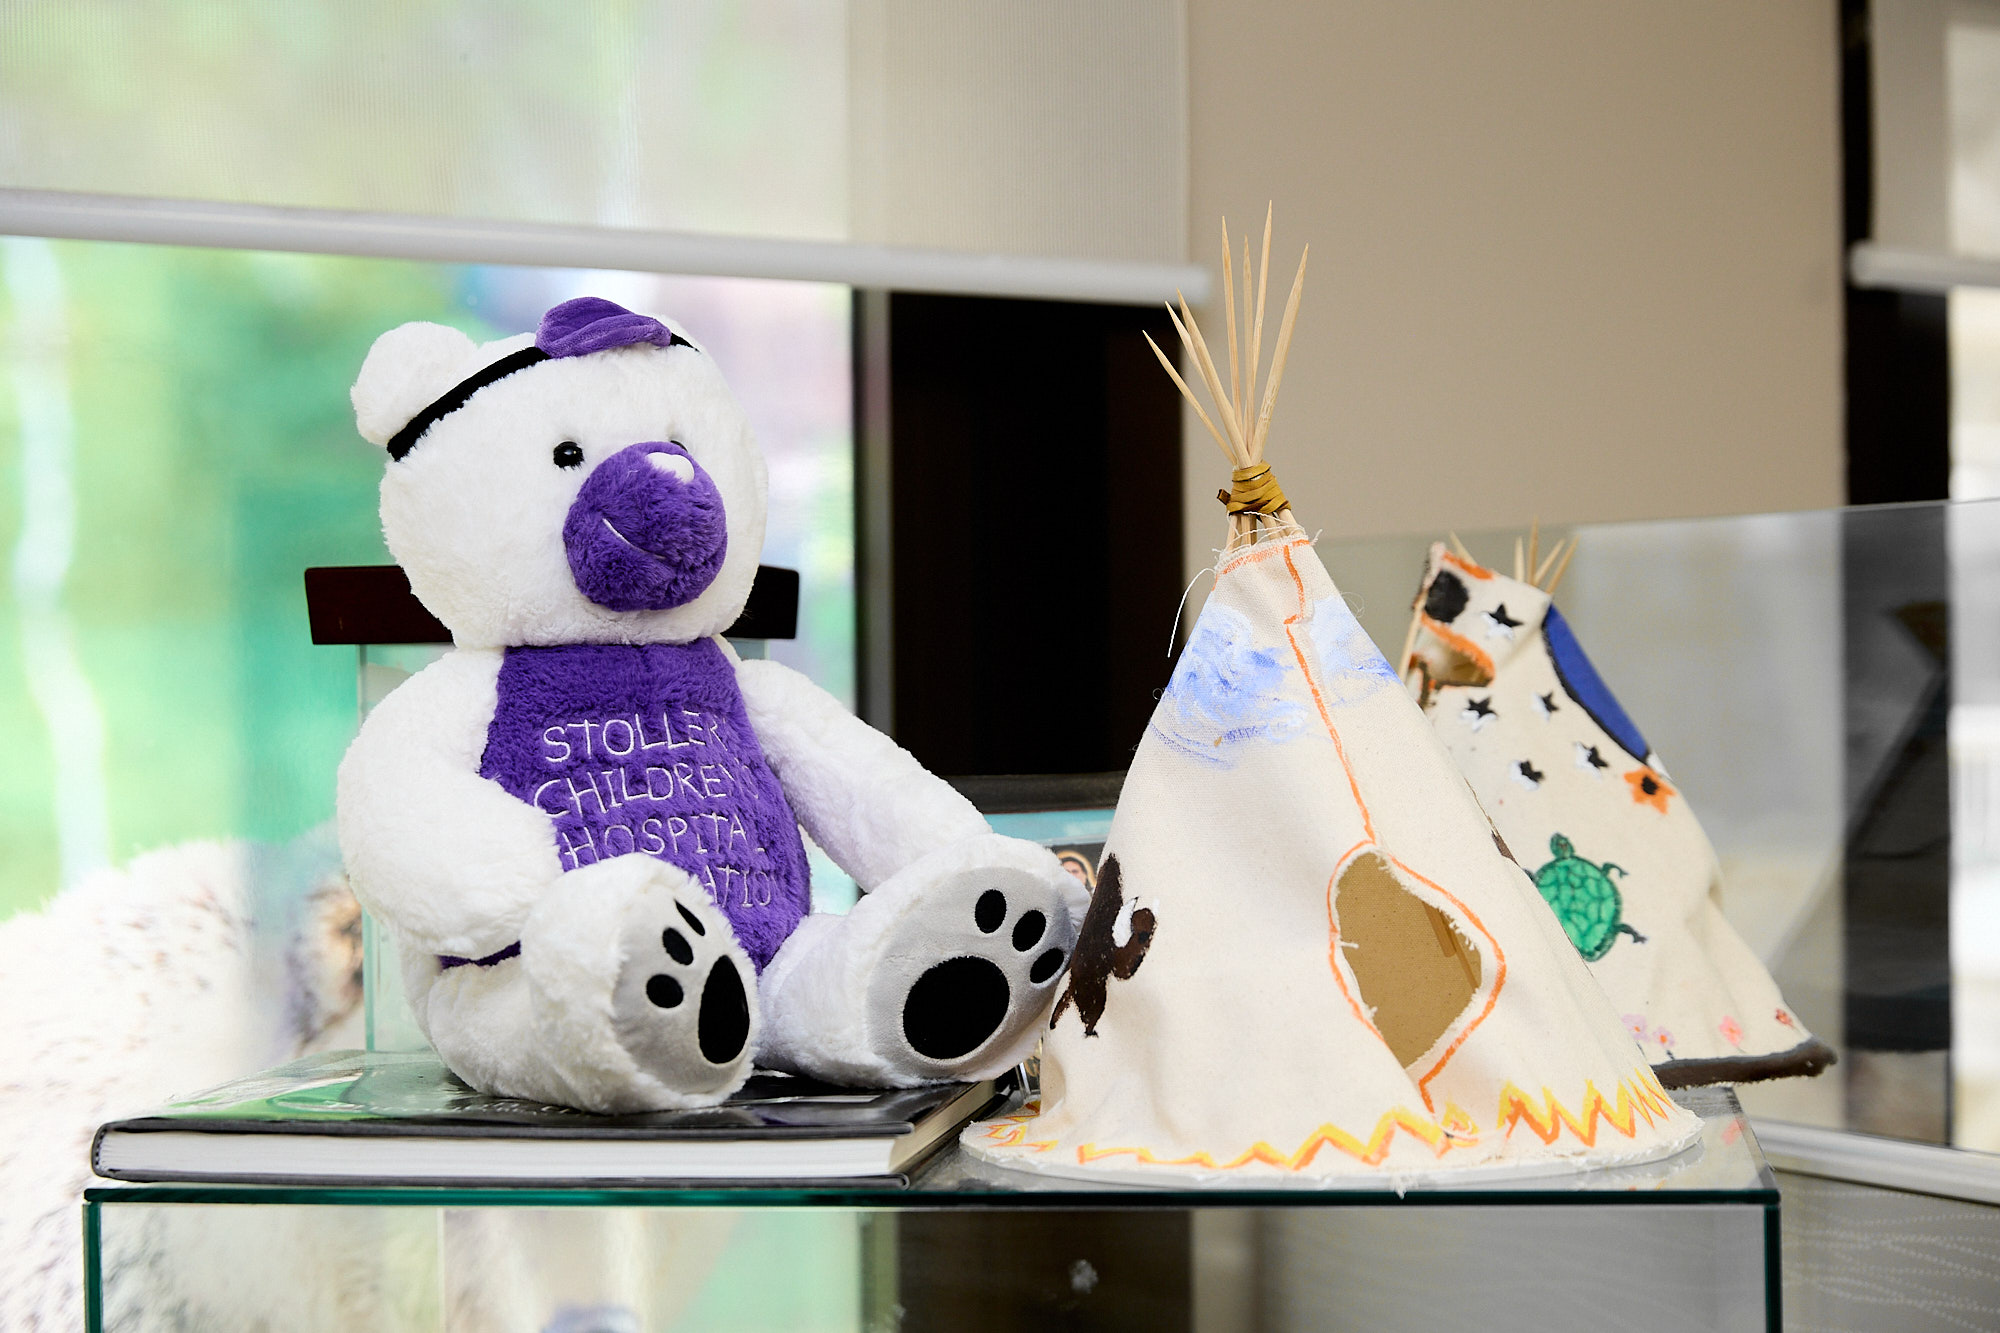 Stollery white and purple bear stuffy sitting on a shelf with two tipis.